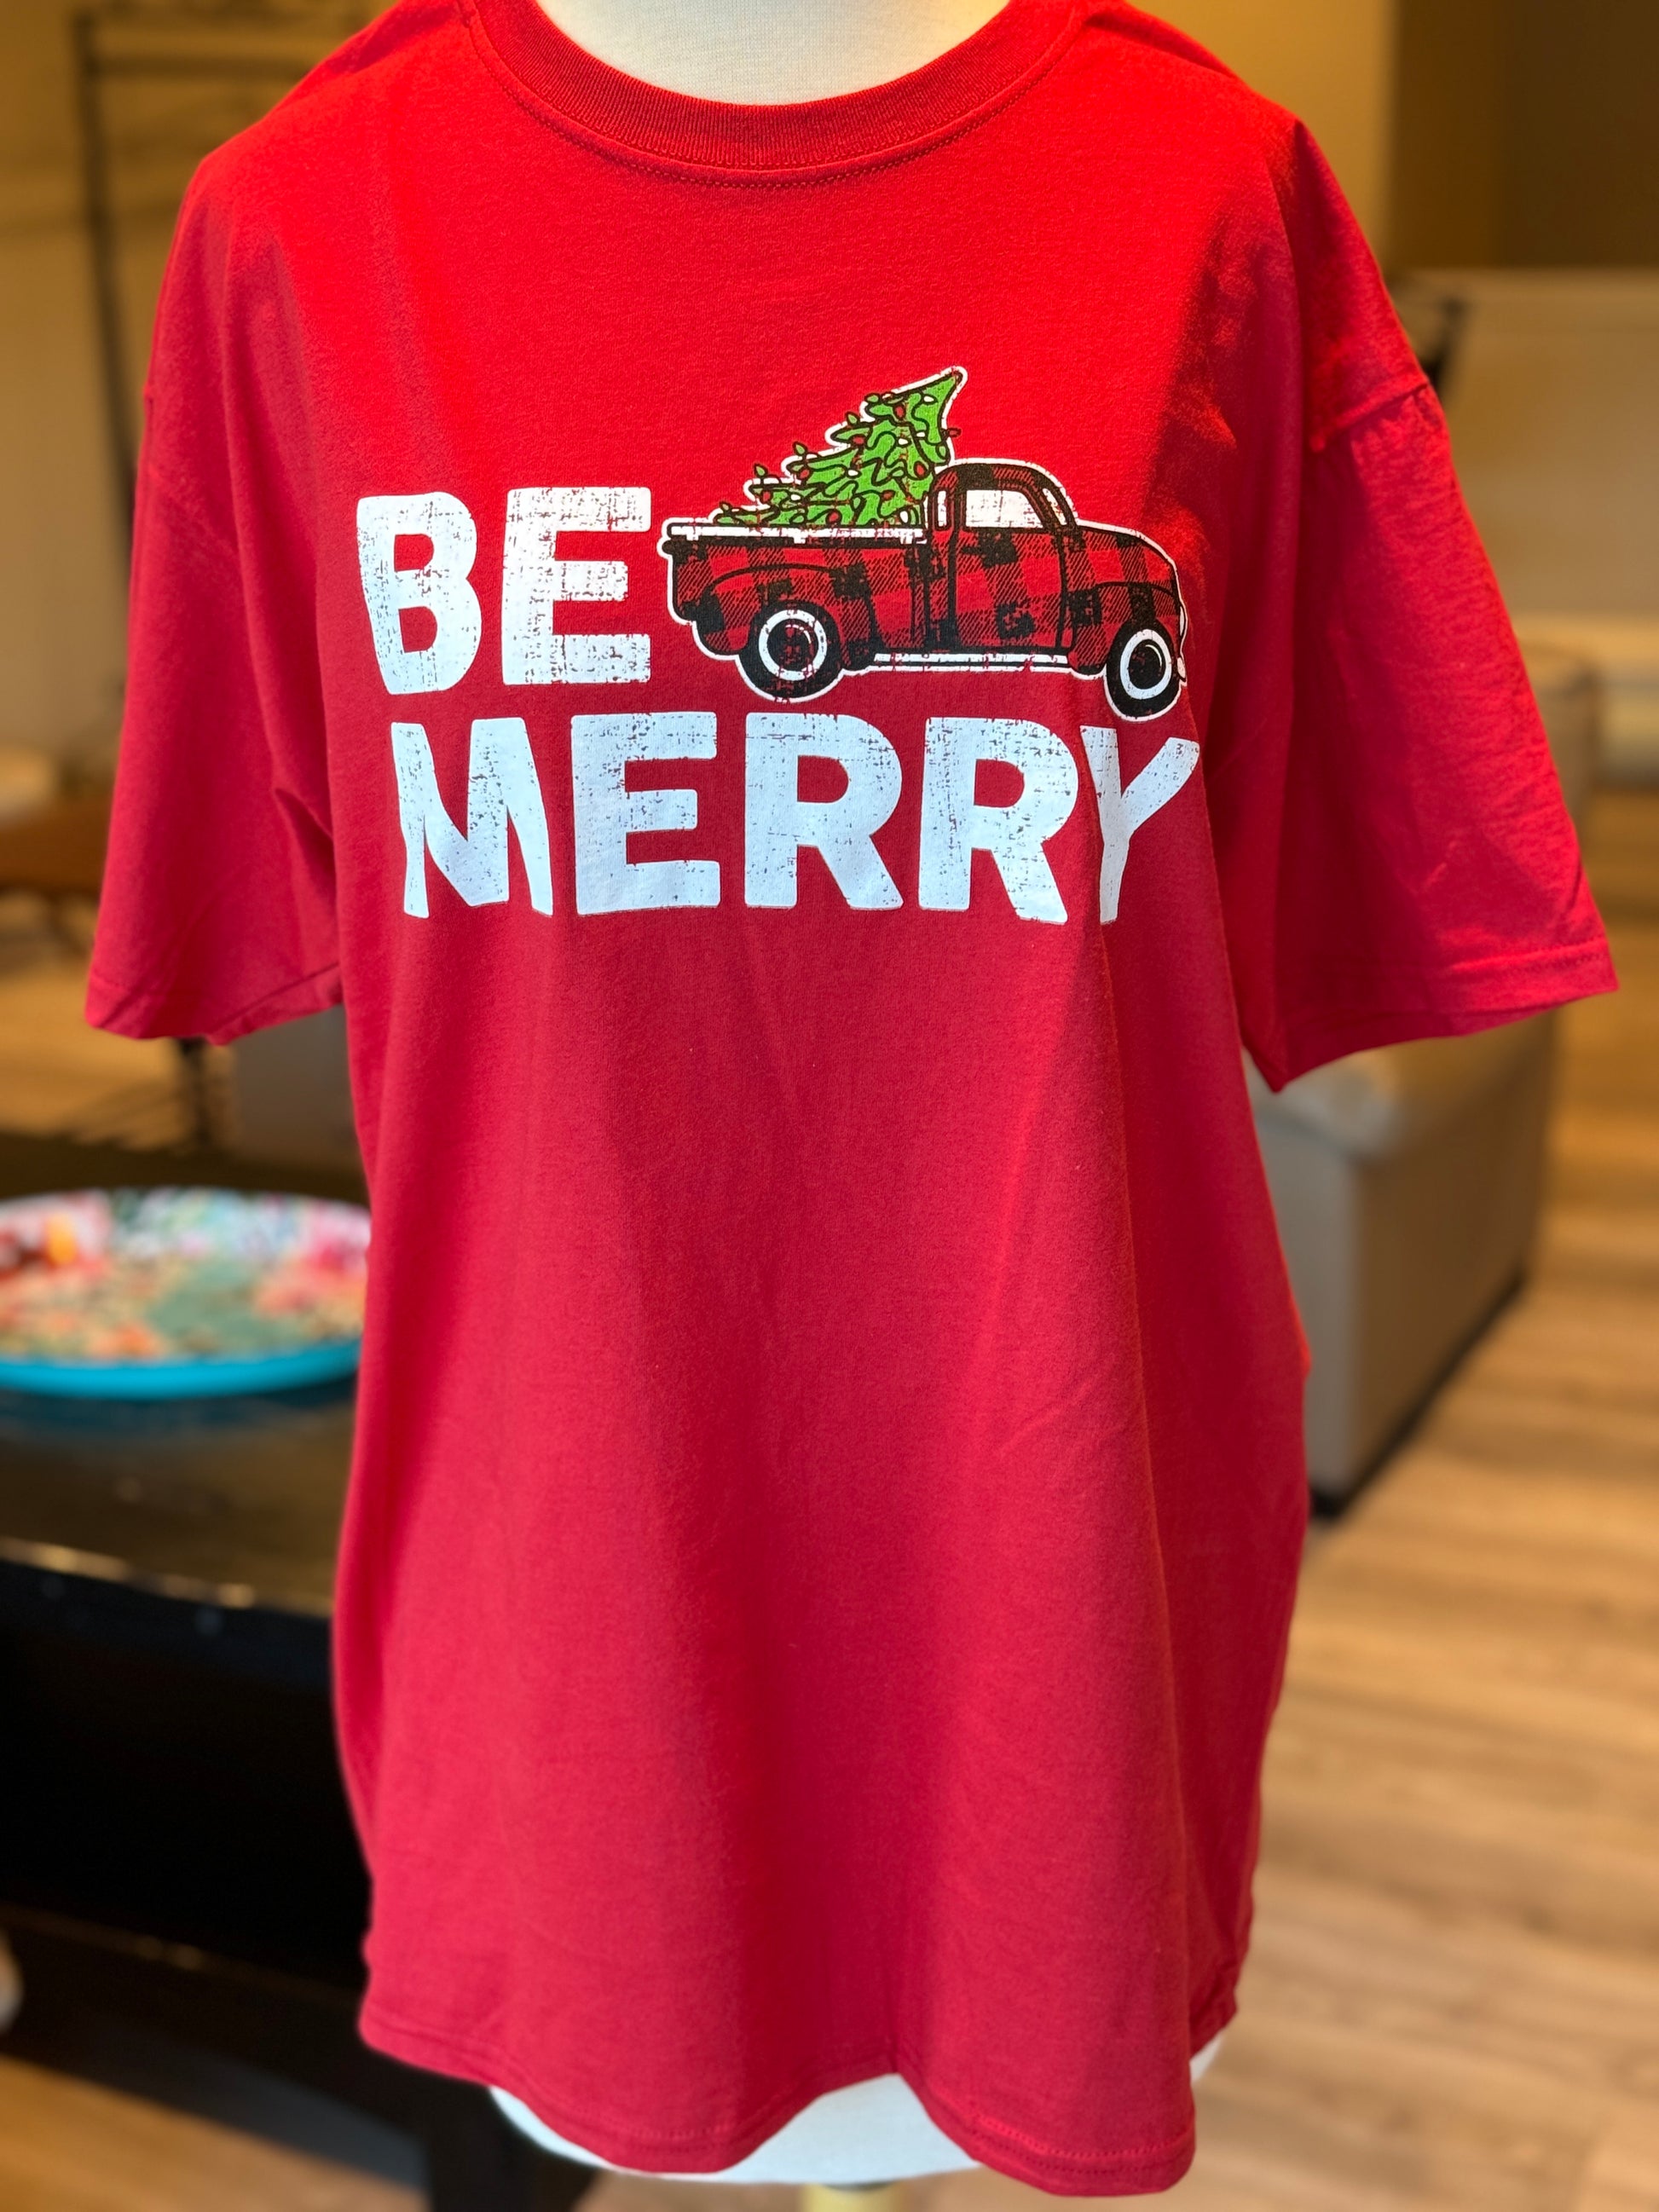 Be Merry - Christmas Shirt Design Graphic by texassoutherncuts